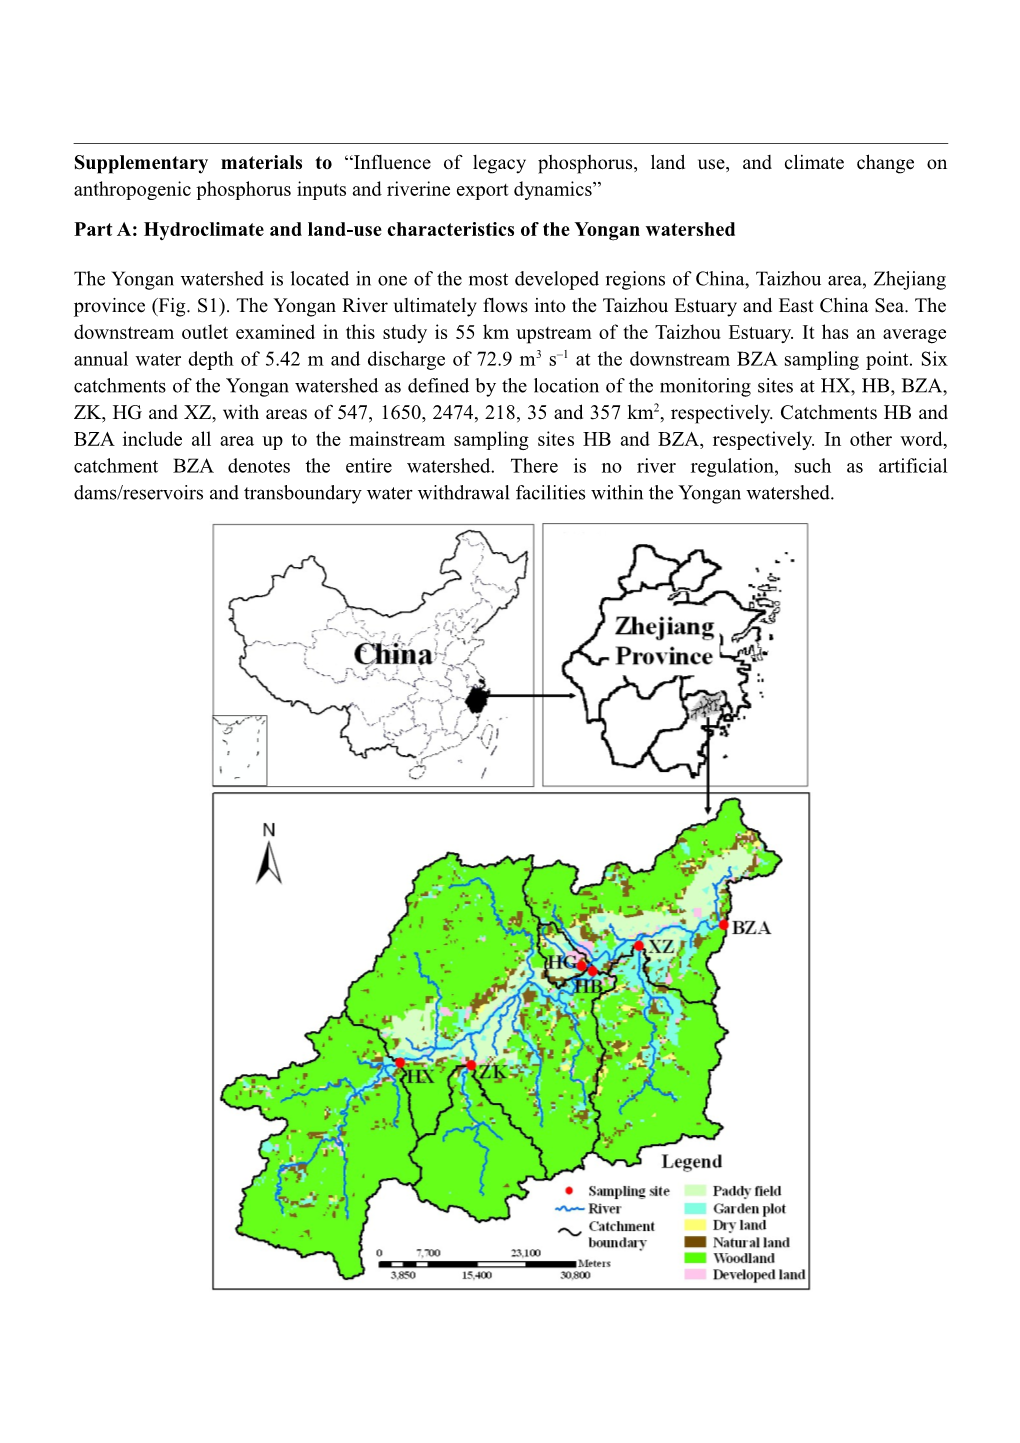 Part A: Hydroclimate and Land-Use Characteristics of the Yongan Watershed